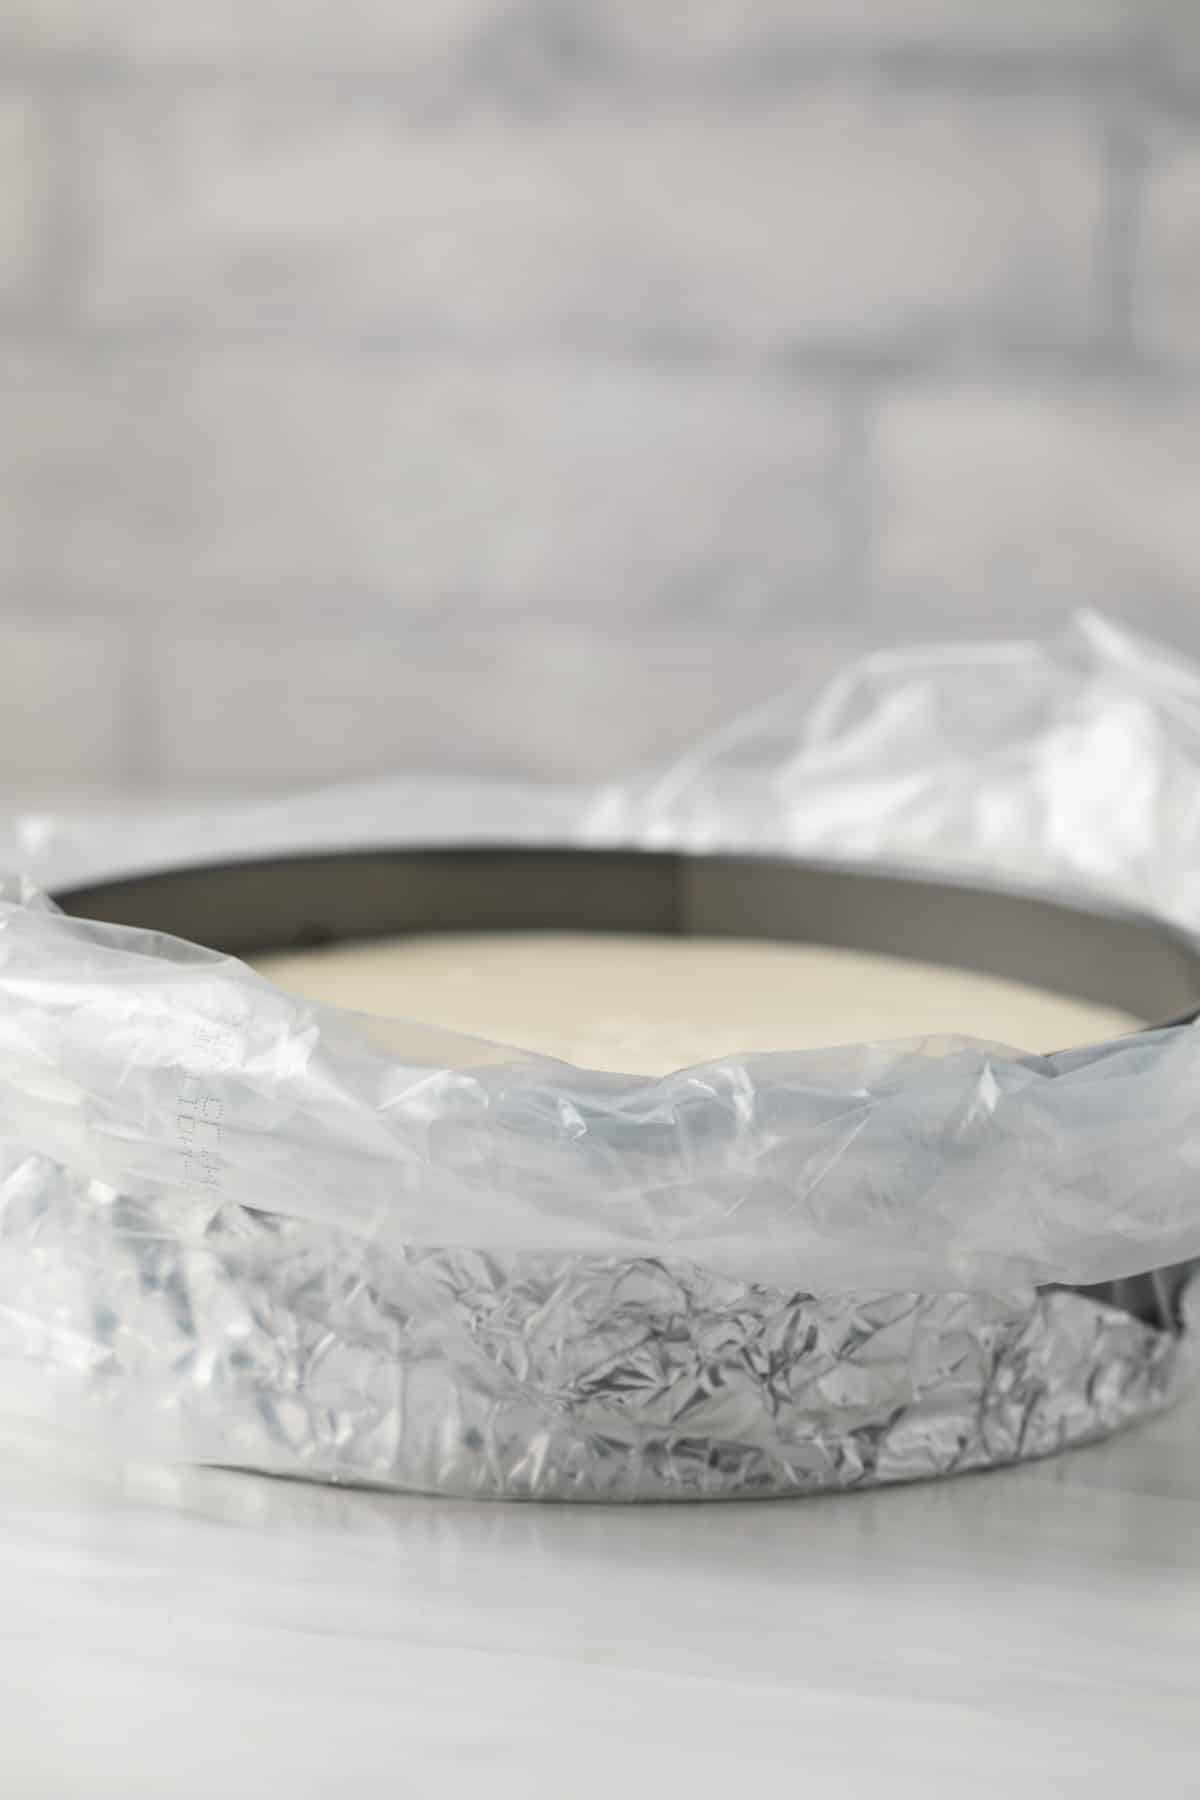 cheesecake in oven bag.